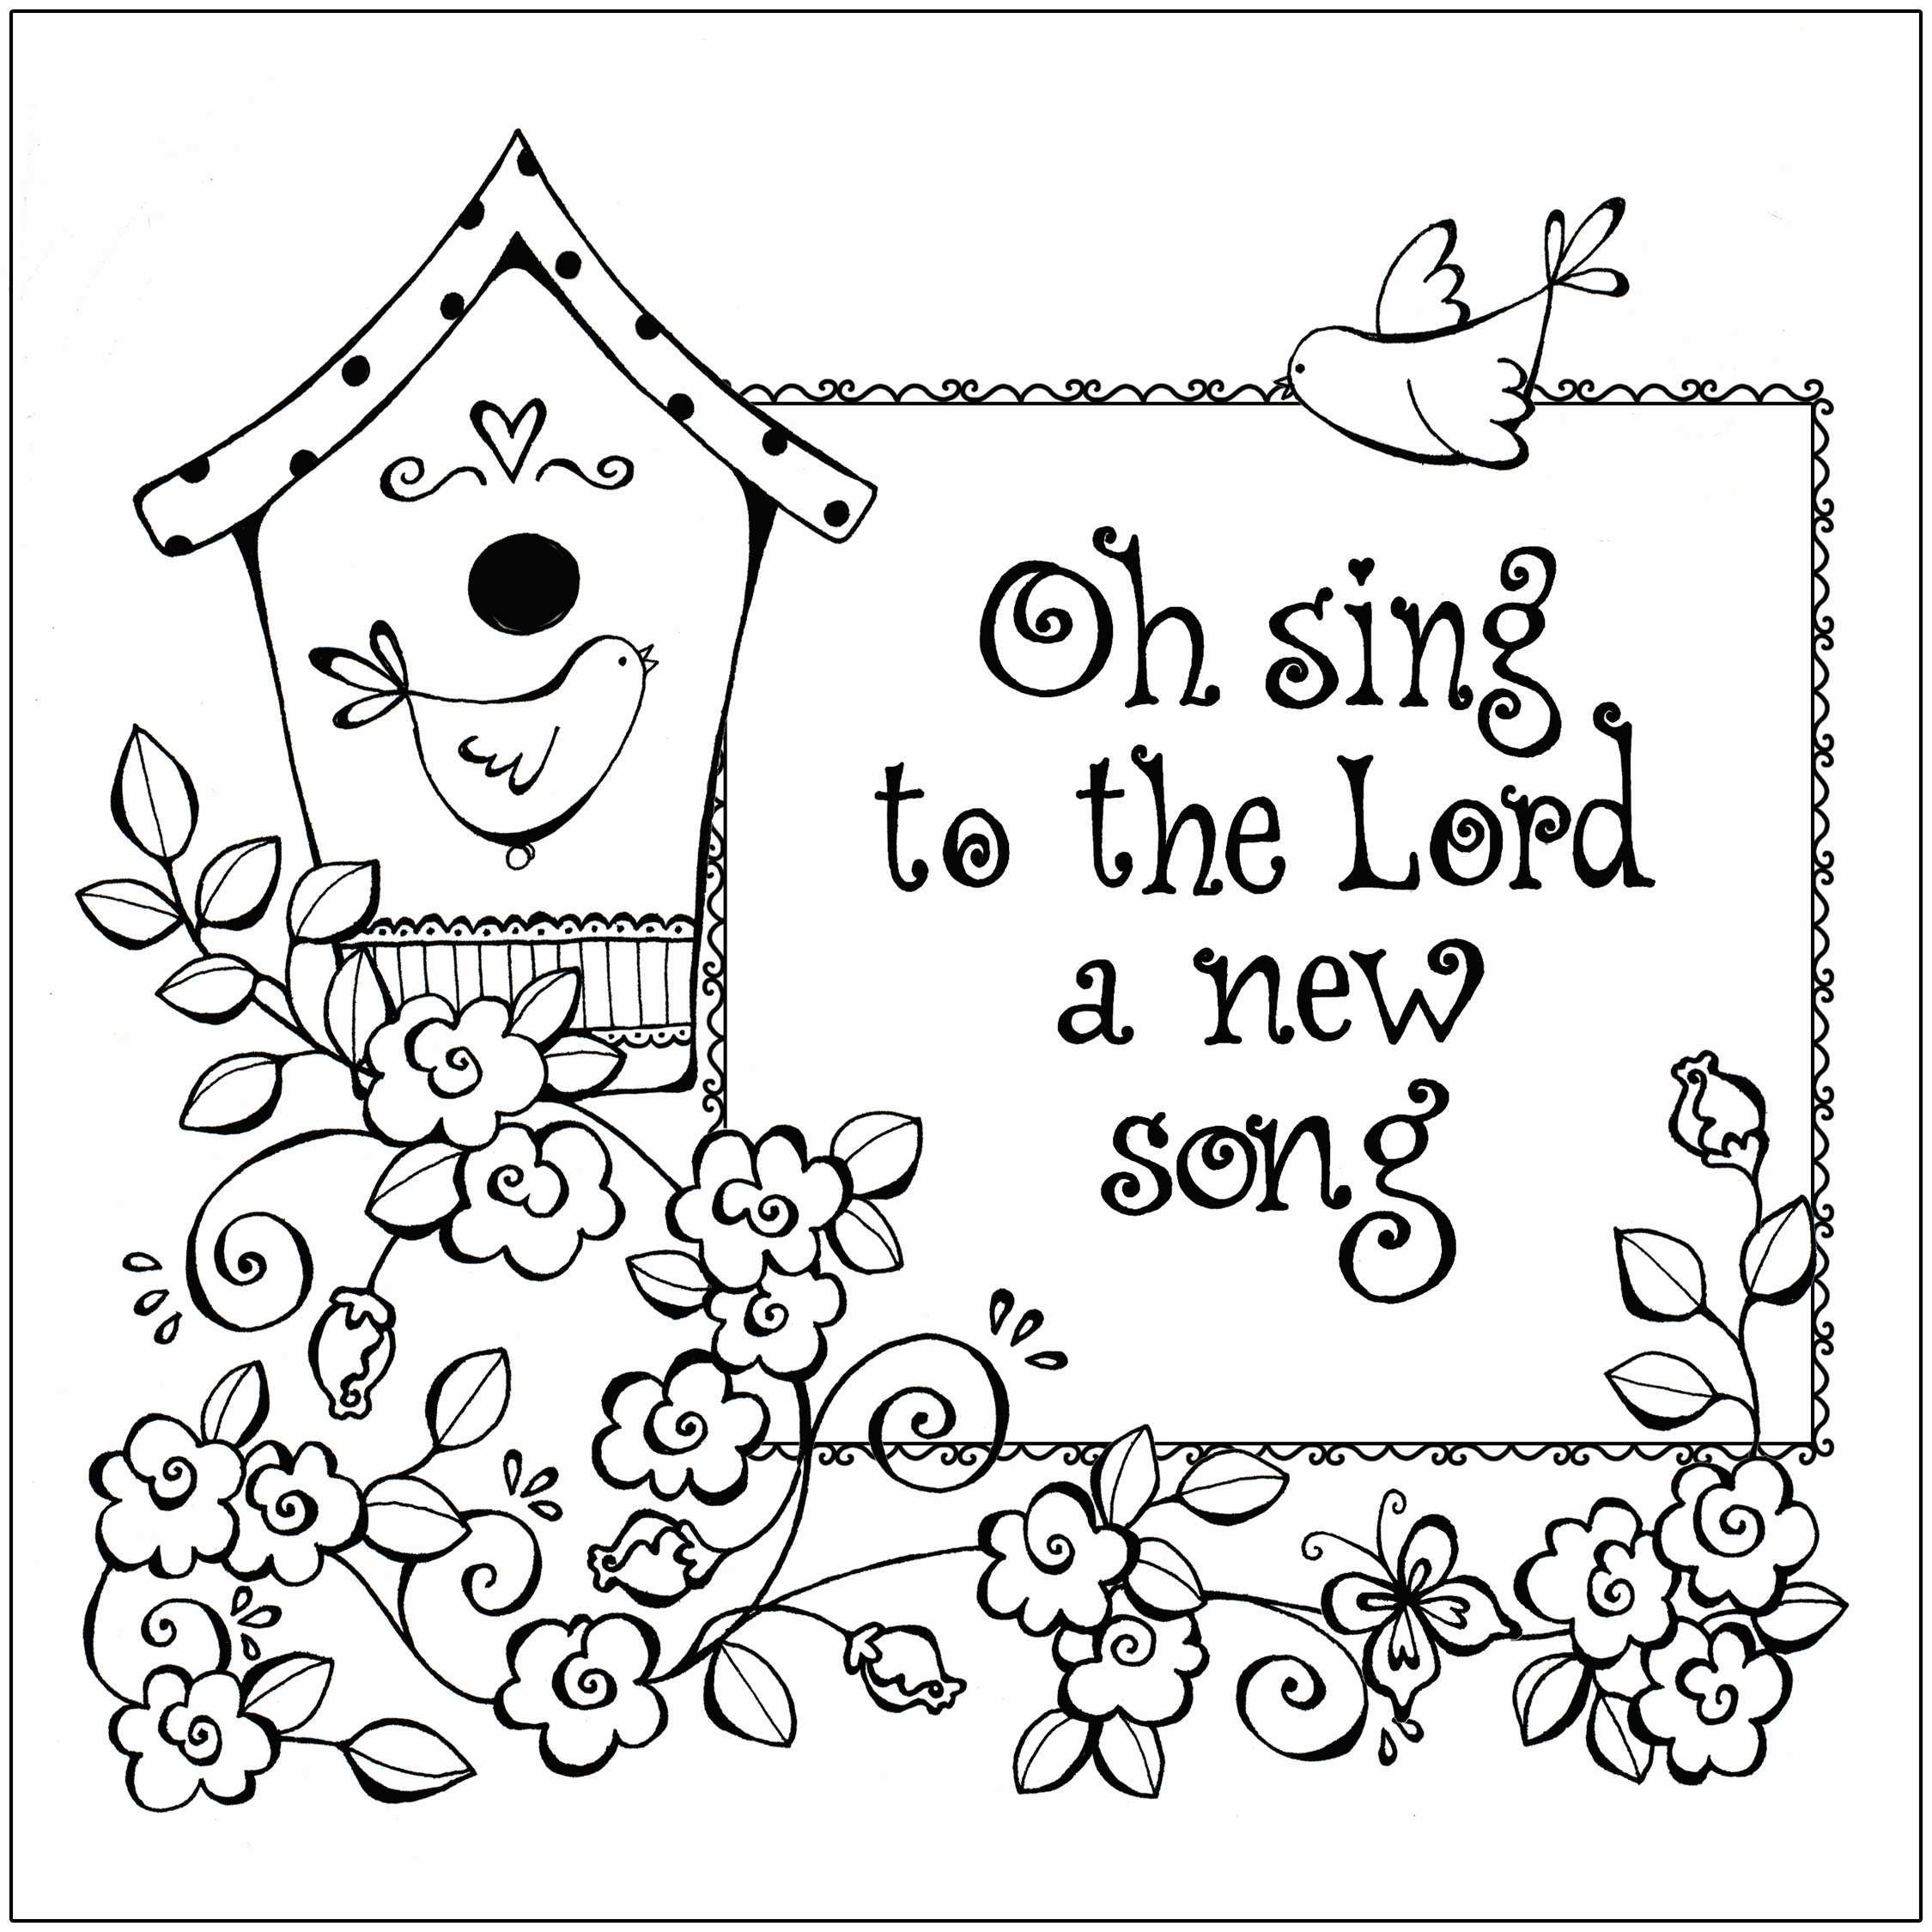 Adorable Christian Bible Coloring Pages